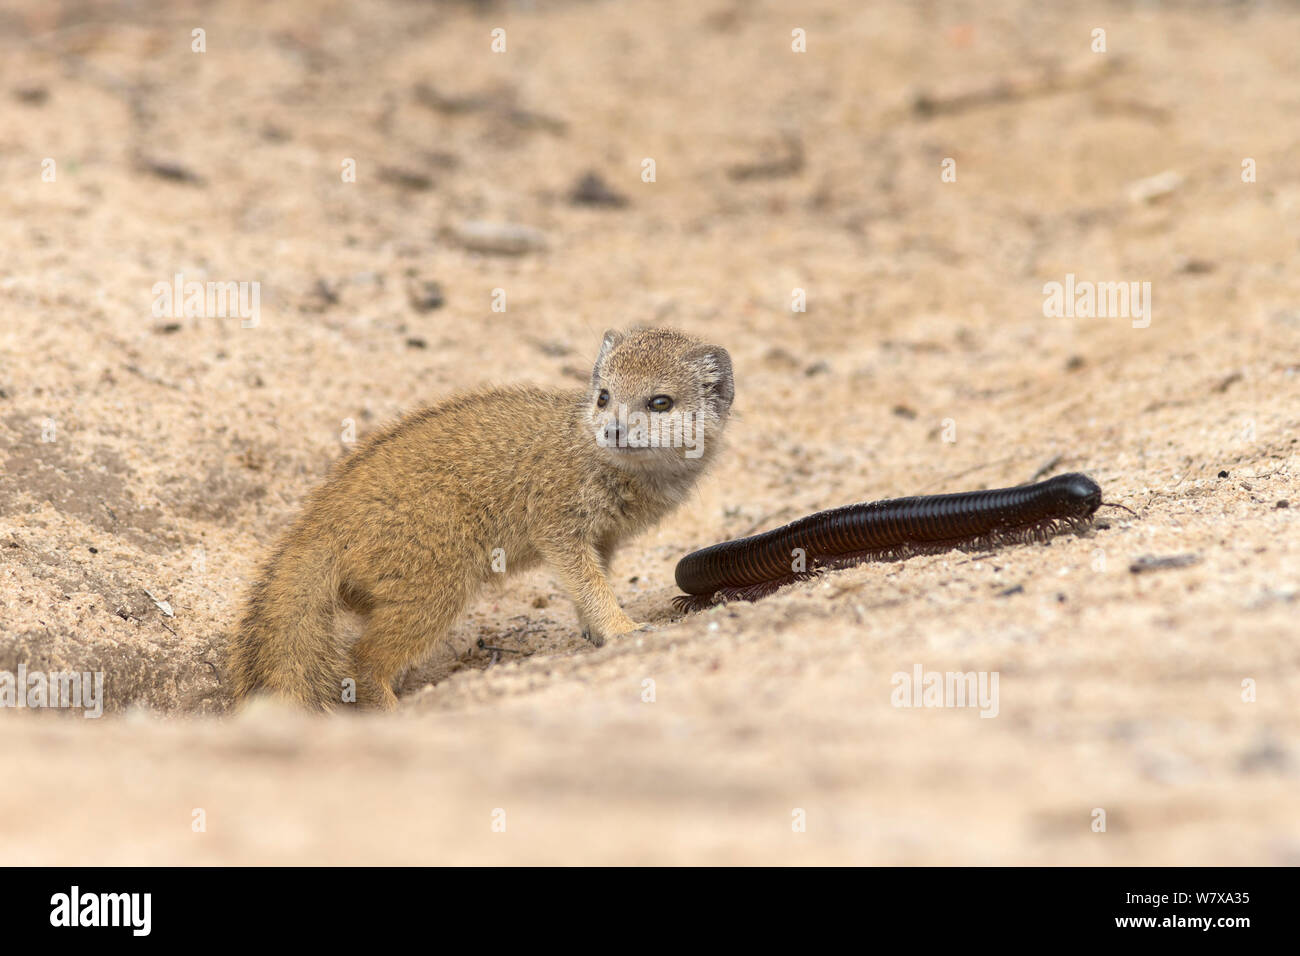 Baby yellow mongoose (Cynictis penicillata) with giant millipedes (Archispirostreptus gigas) by mongoose burrow entrance, Kgalagadi Transfrontier Park, Northern Cape, South Africa, February Stock Photo